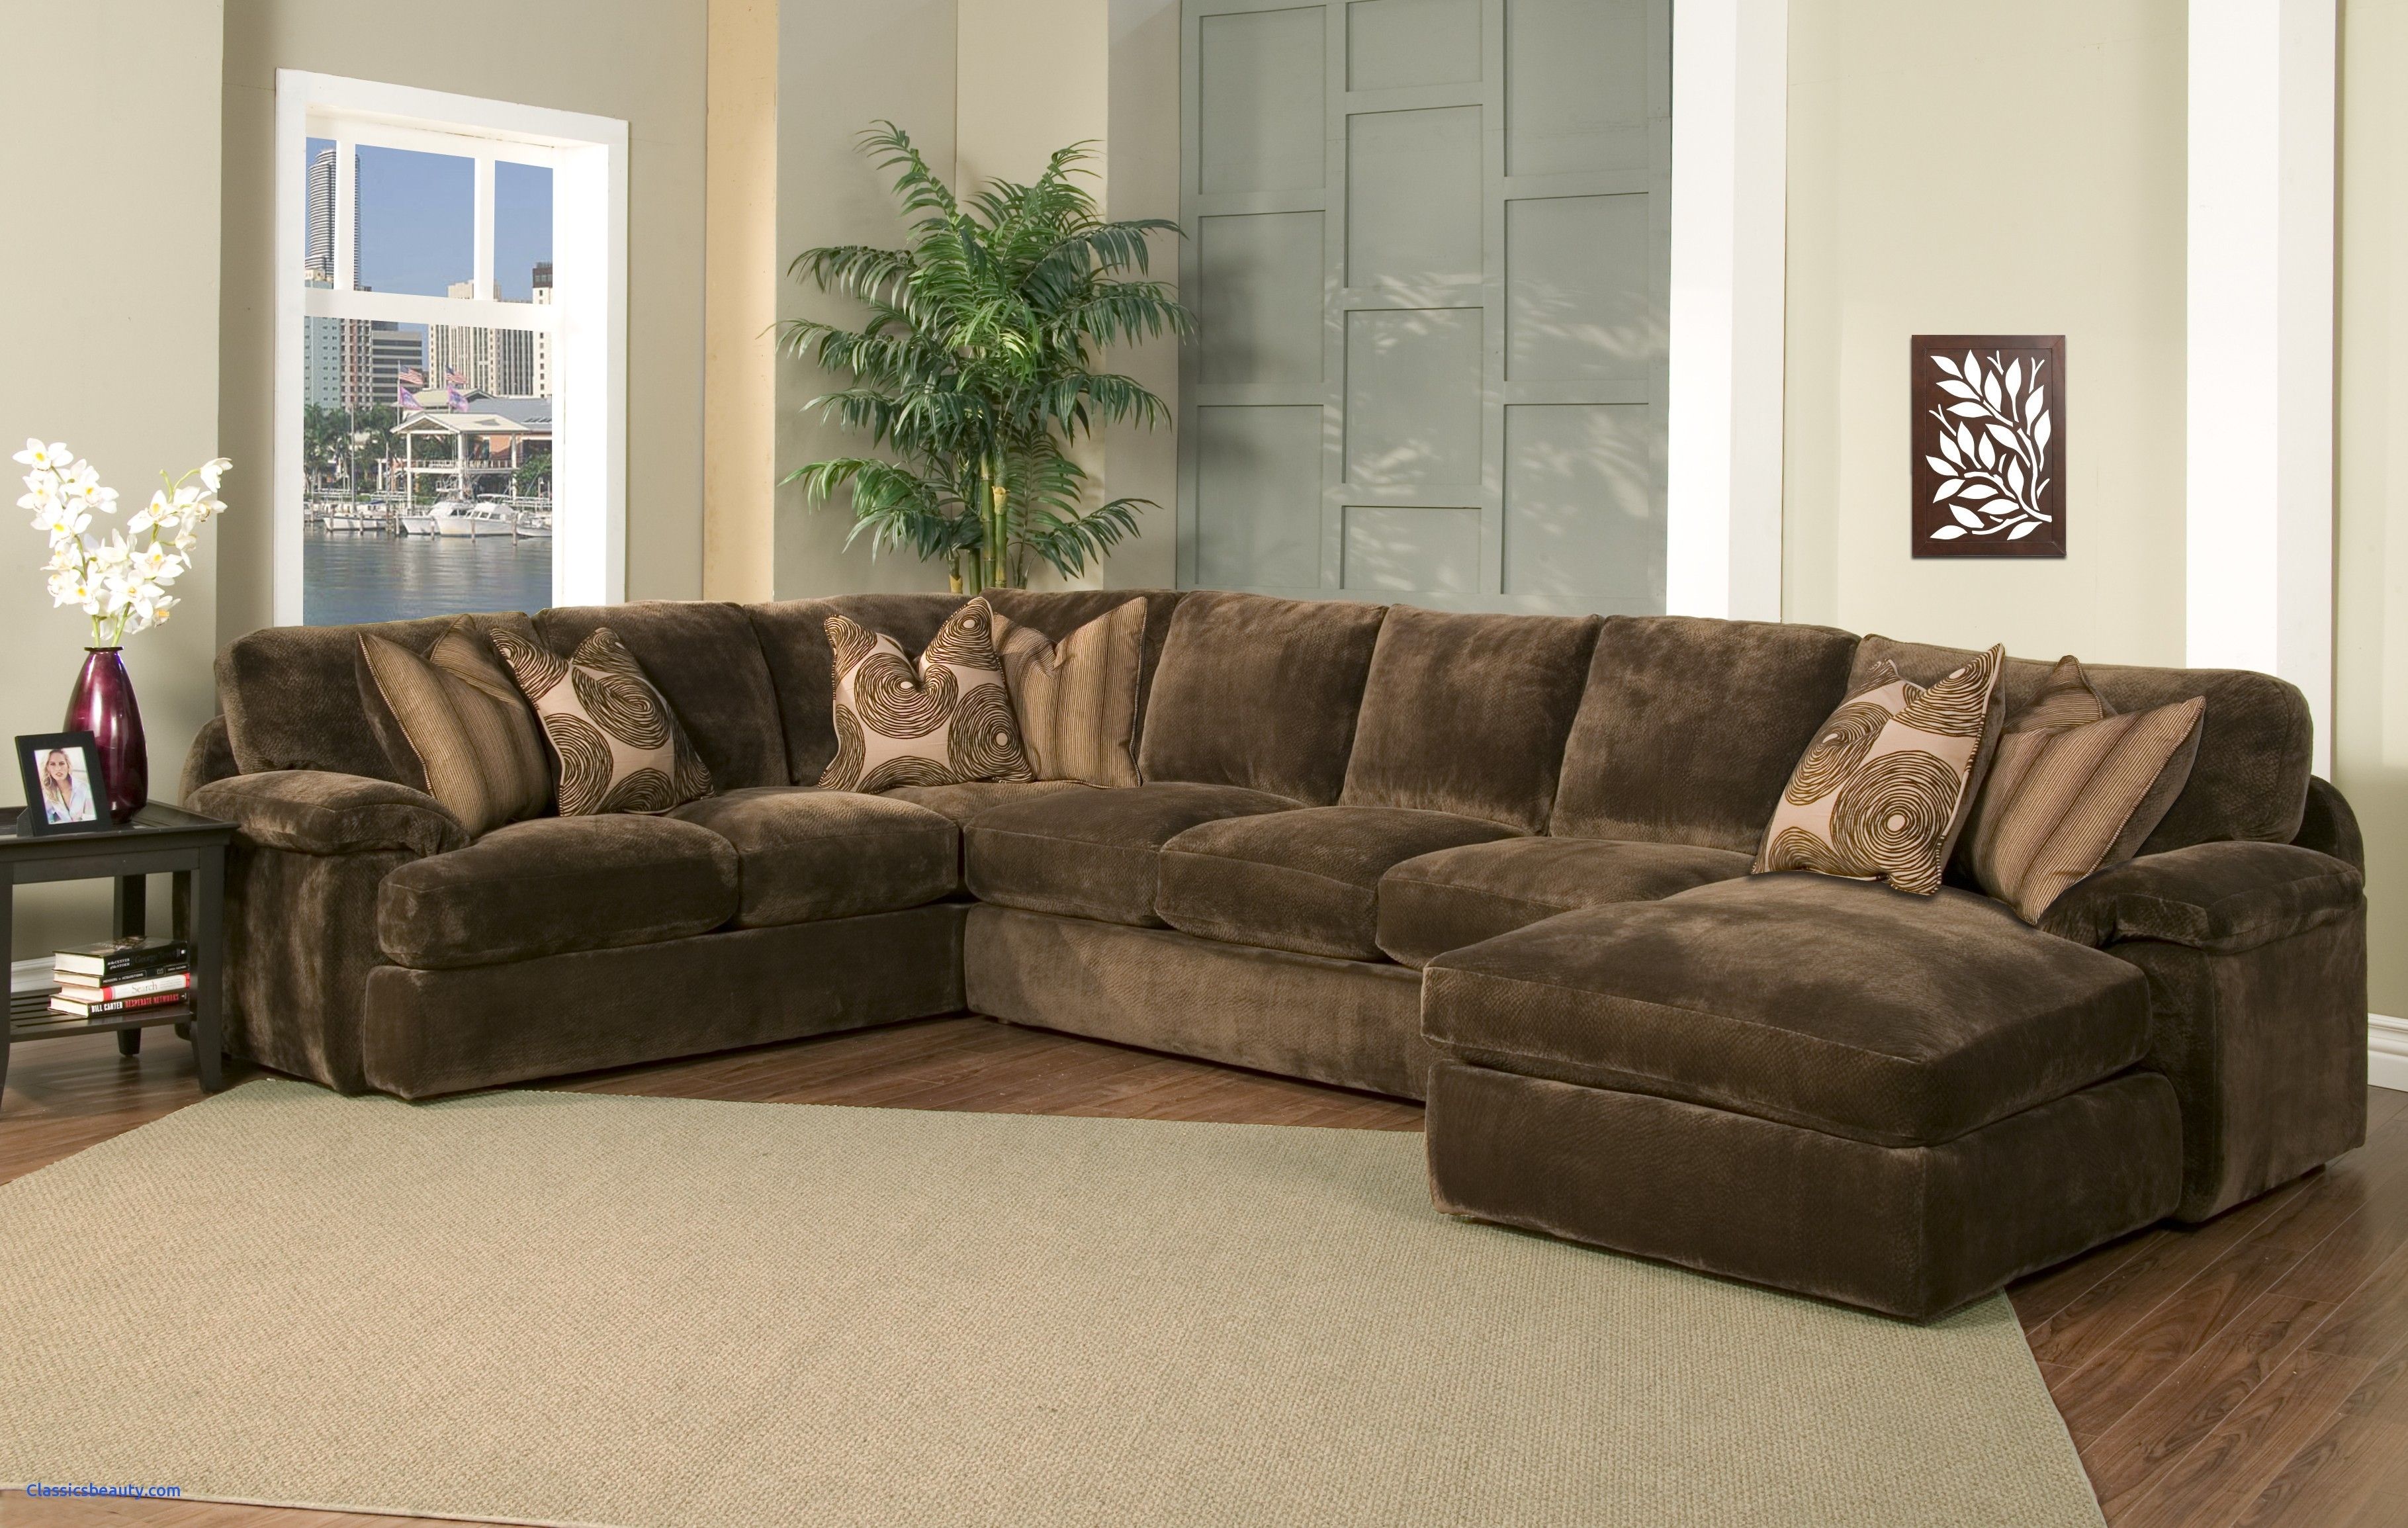 Sofa : Sectionala Sale Spring Hill Florida Amazon Salesectional Pertaining To Michigan Sectional Sofas (Photo 4 of 10)